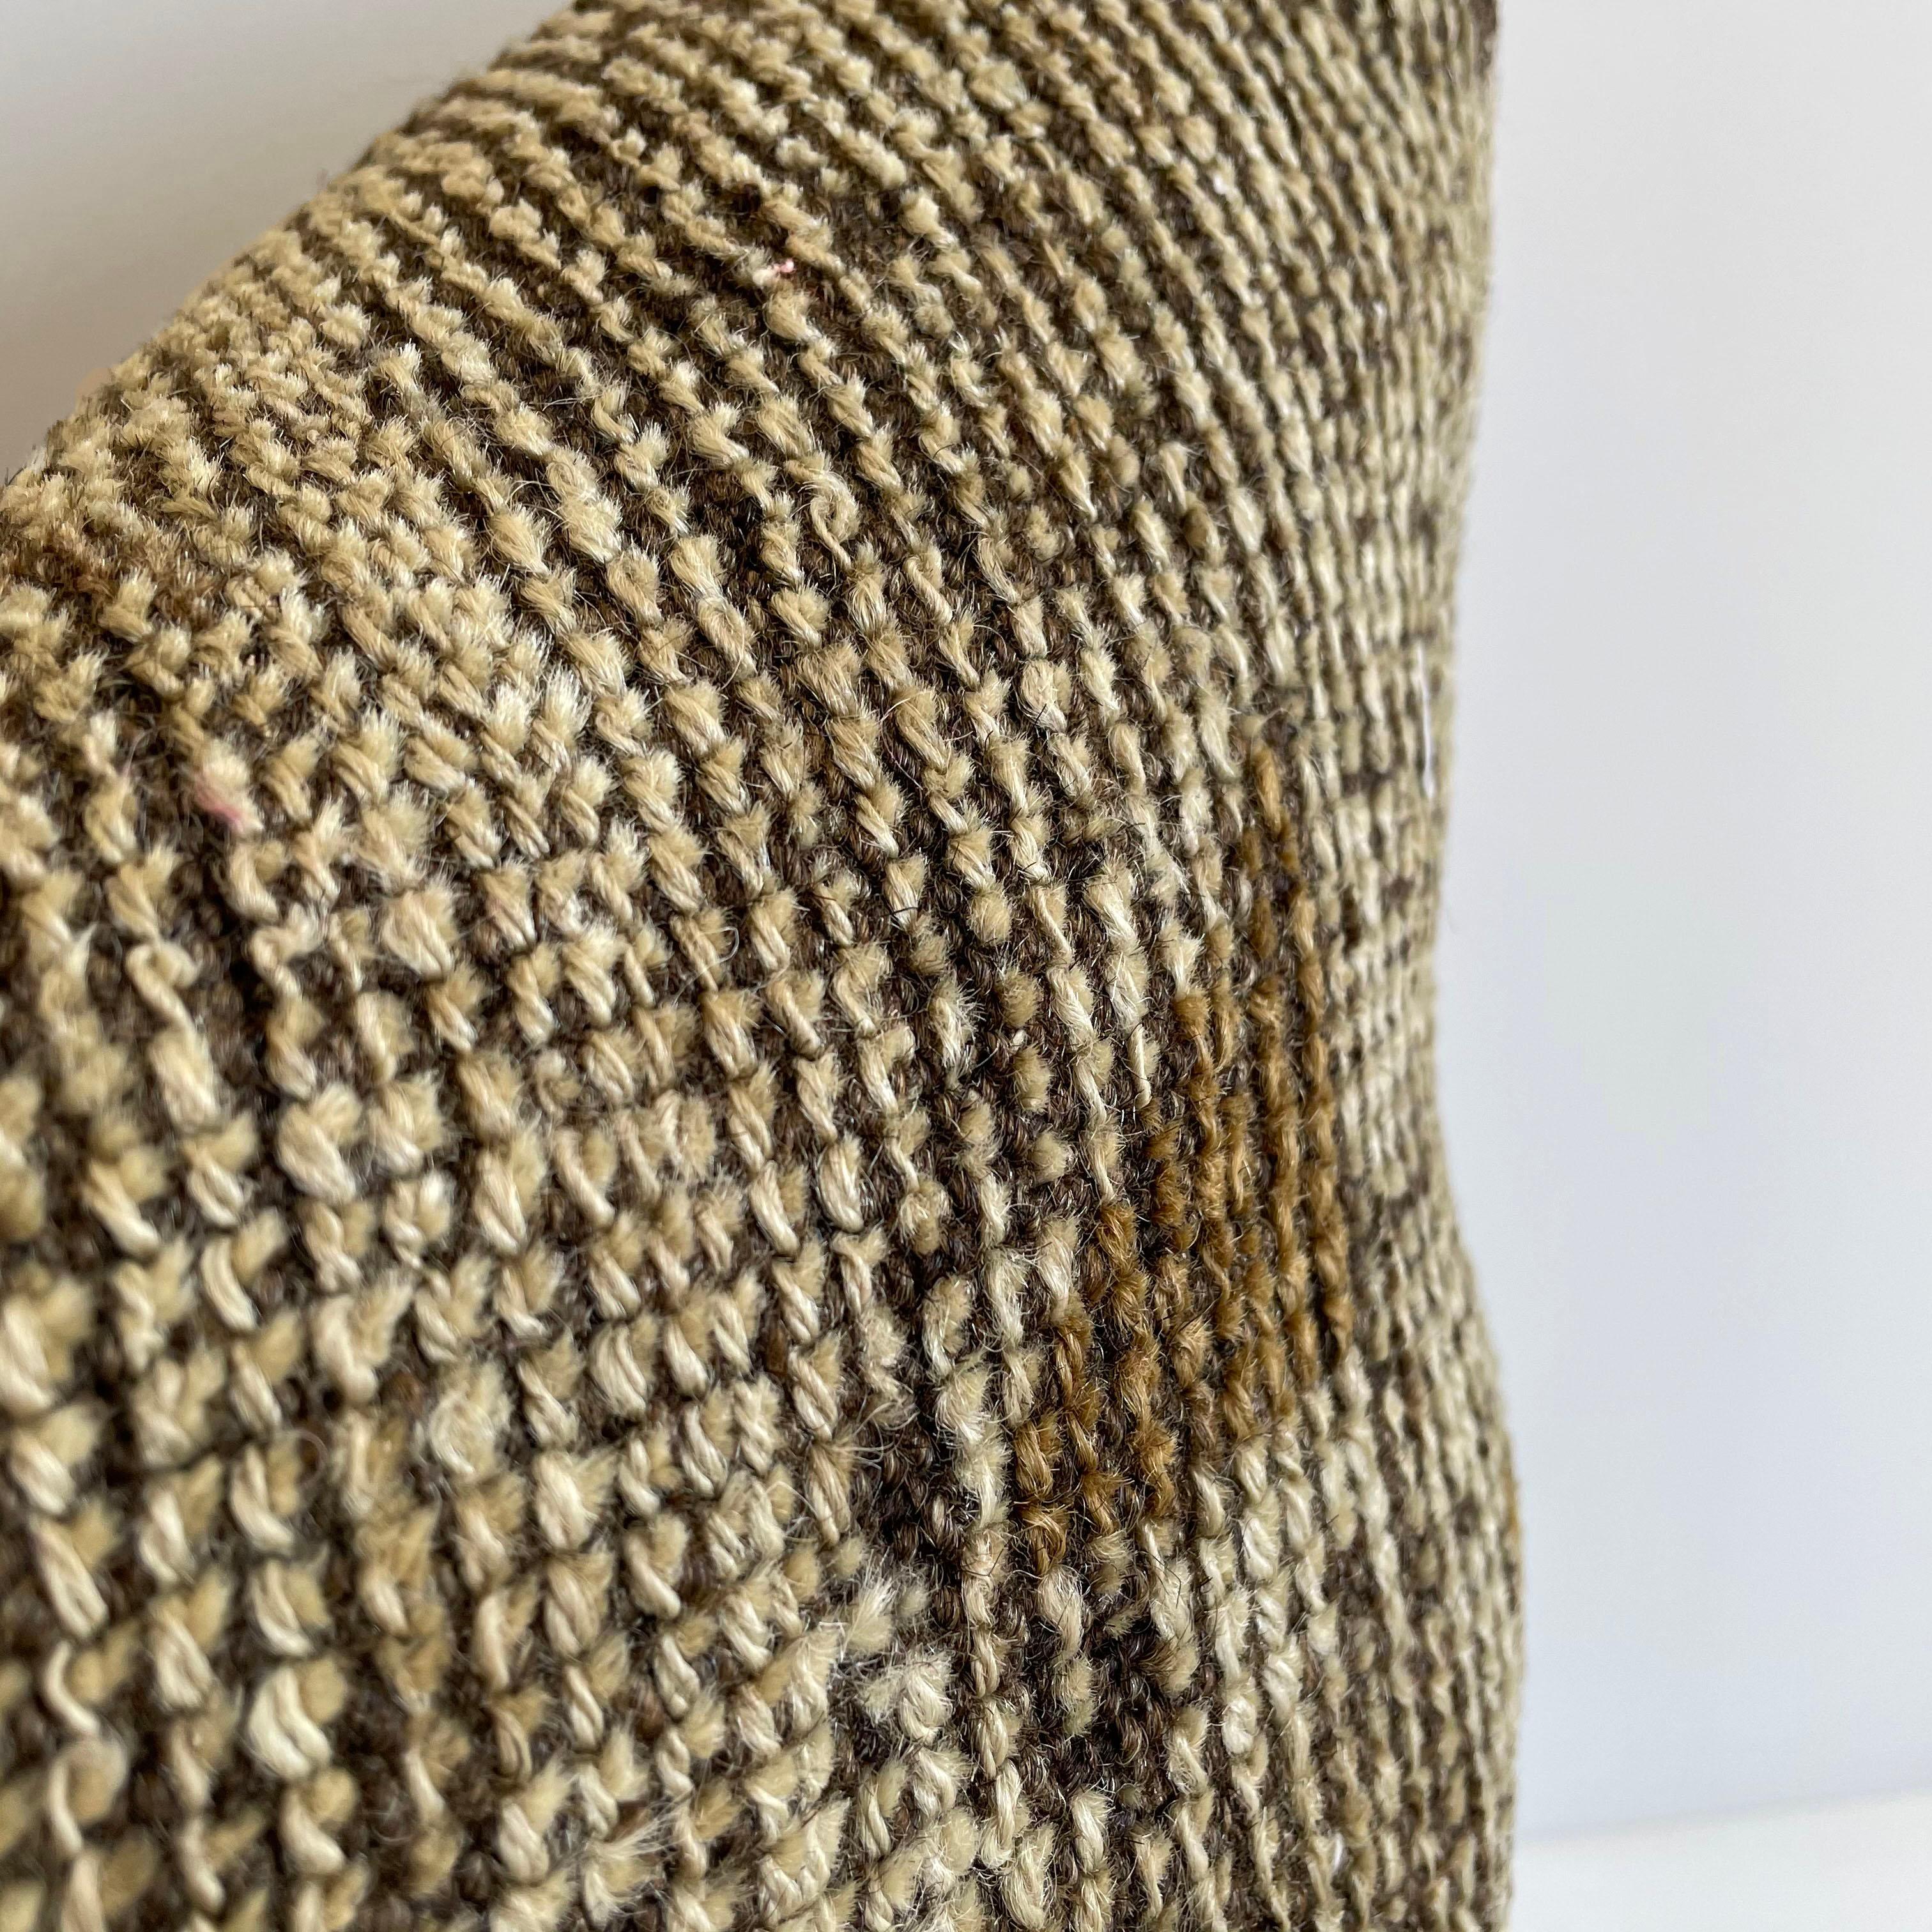 Antique woven rug pillow in natural gray brown and taupe with geometric patterns. The backside is a coordinating cotton. Our pillows are constructed with vintage one of a kind textiles from around the globe. Carefully constructed with the finest